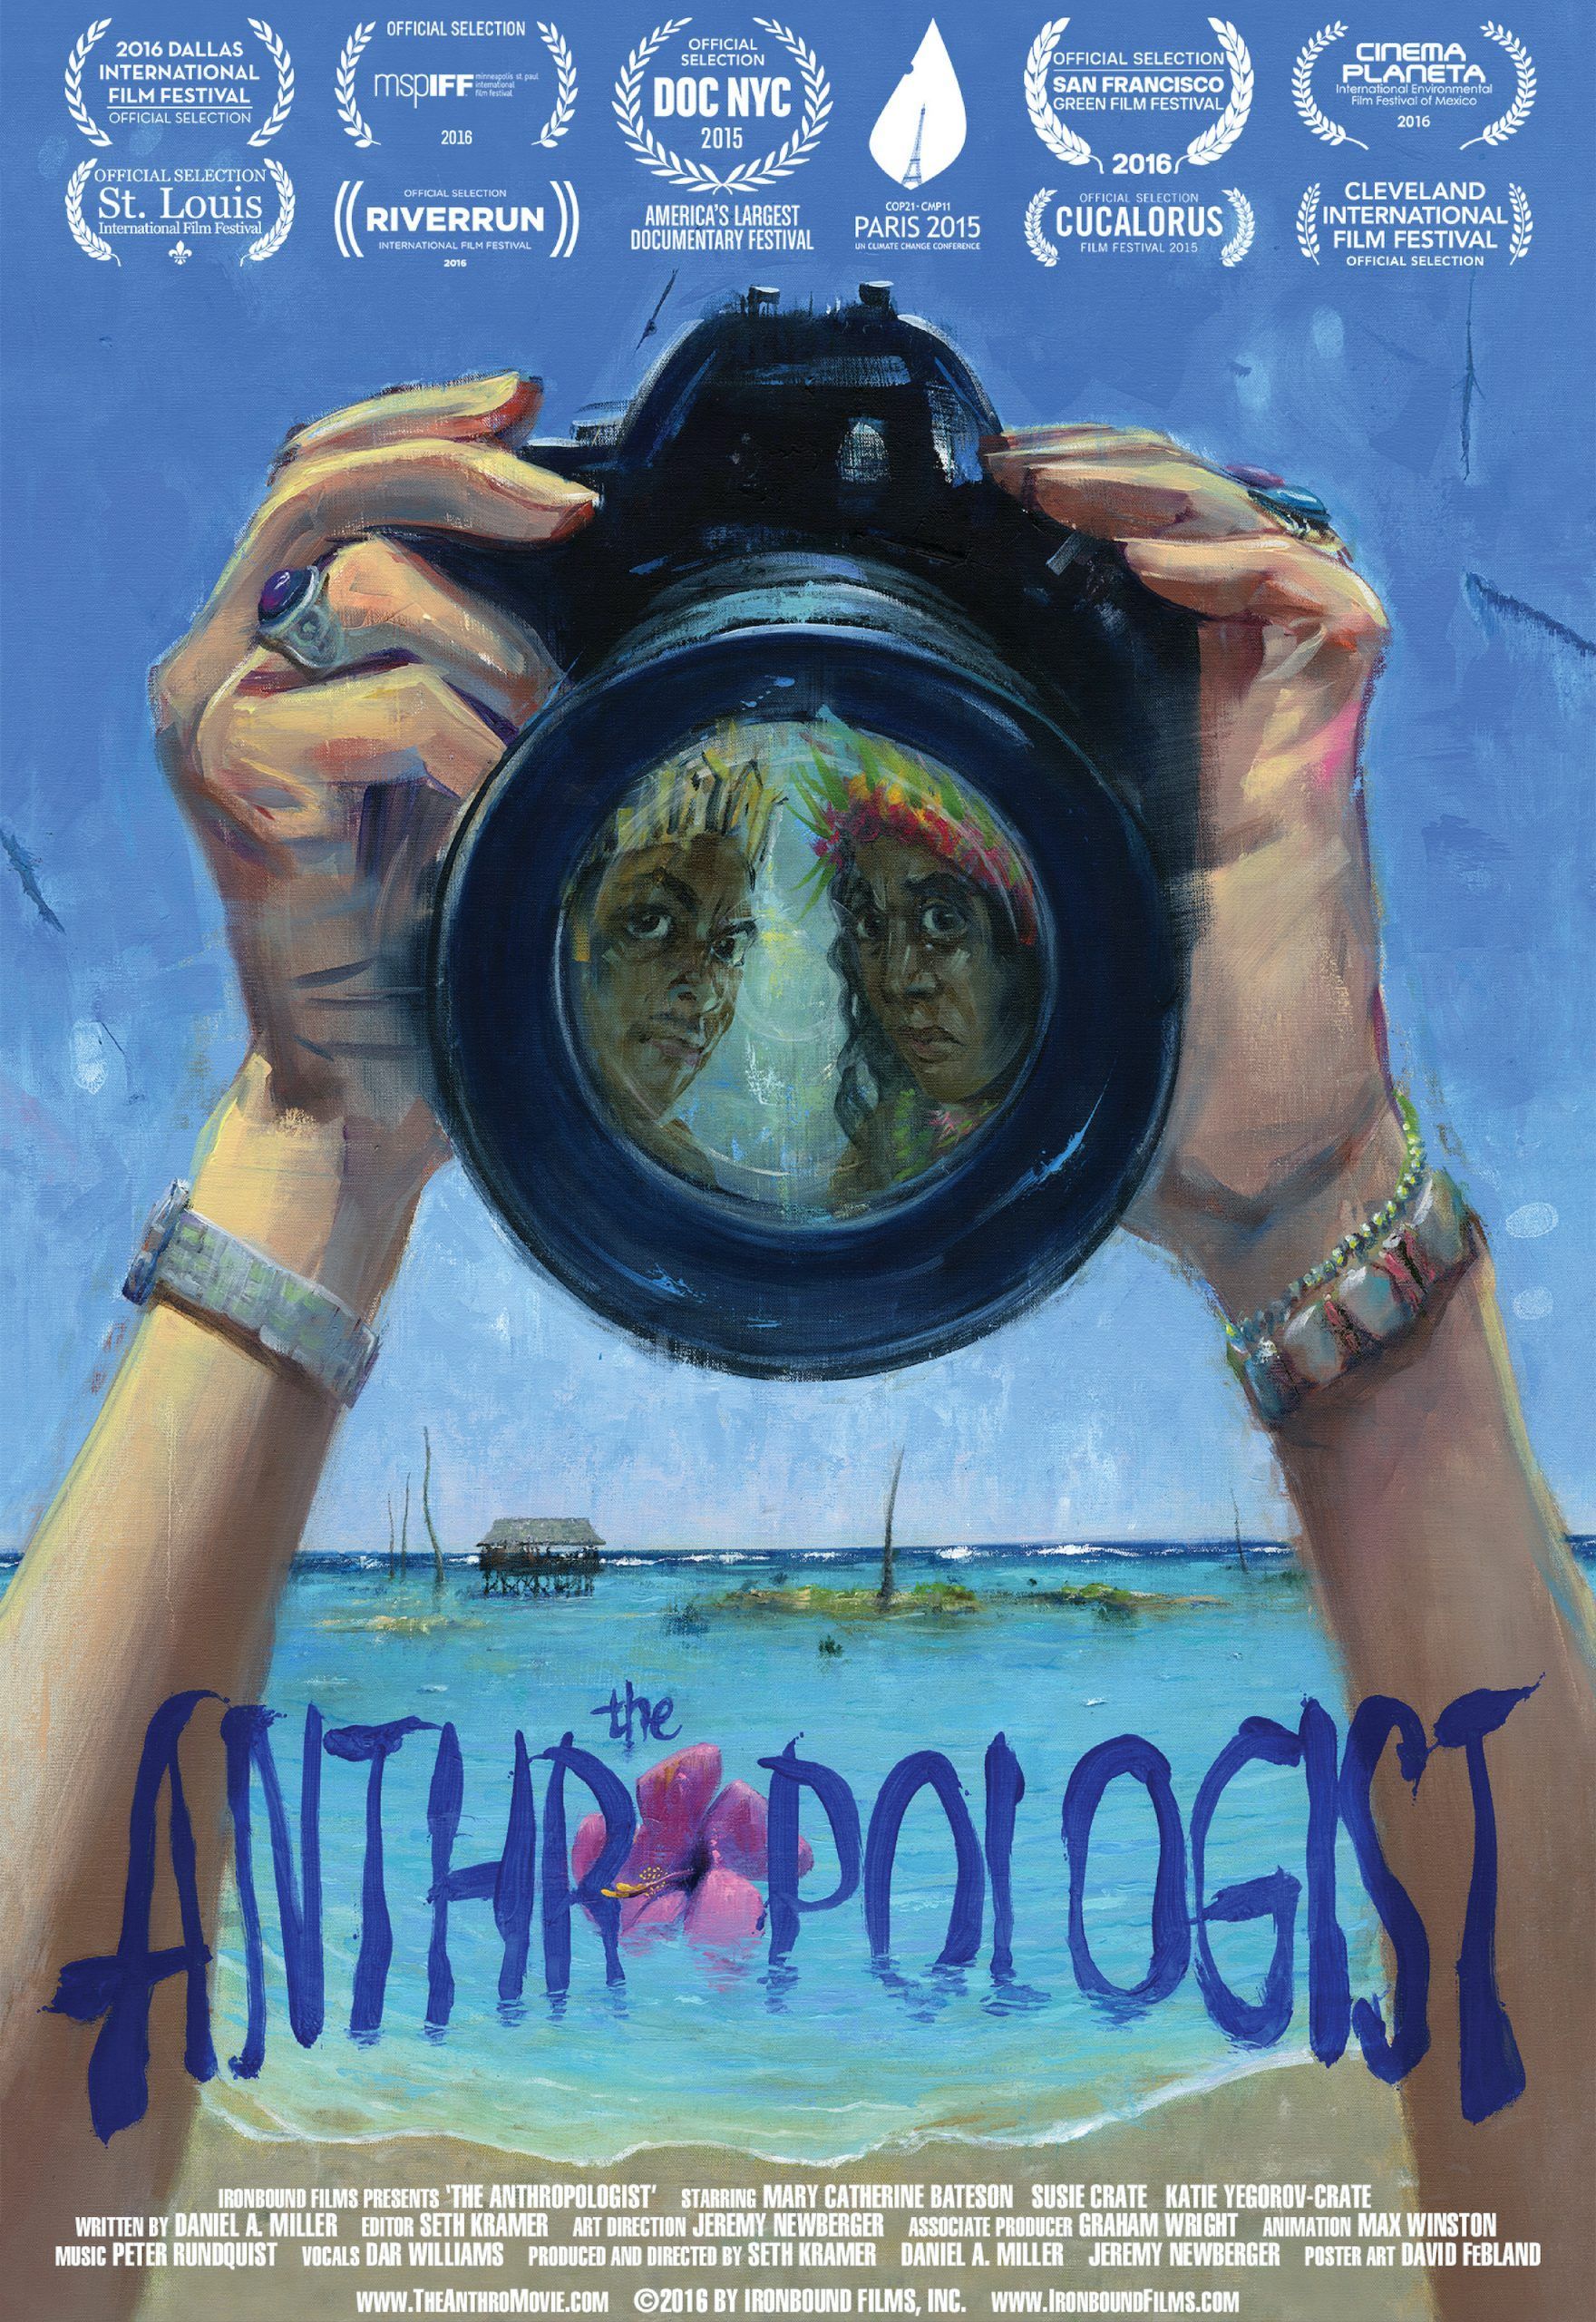 TheAnthropologist_Poster2200